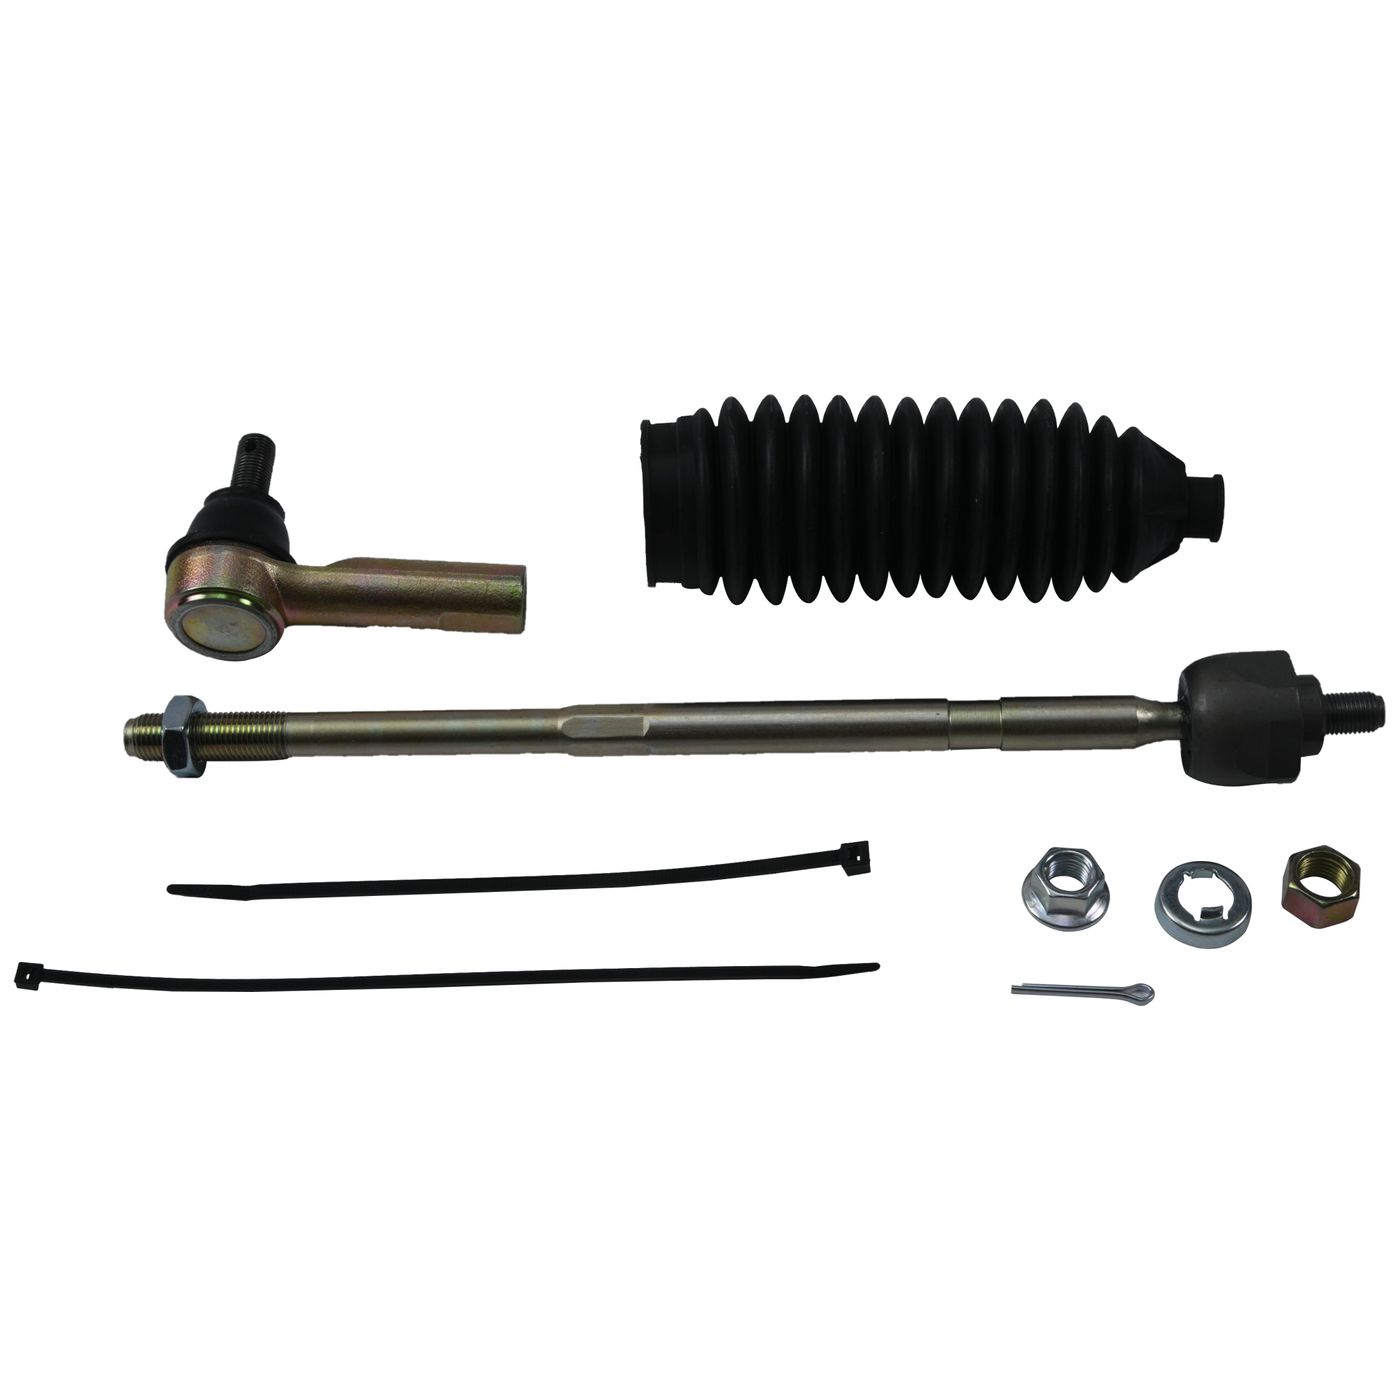 Wrp Tie Rod Ends - WRP511100 image